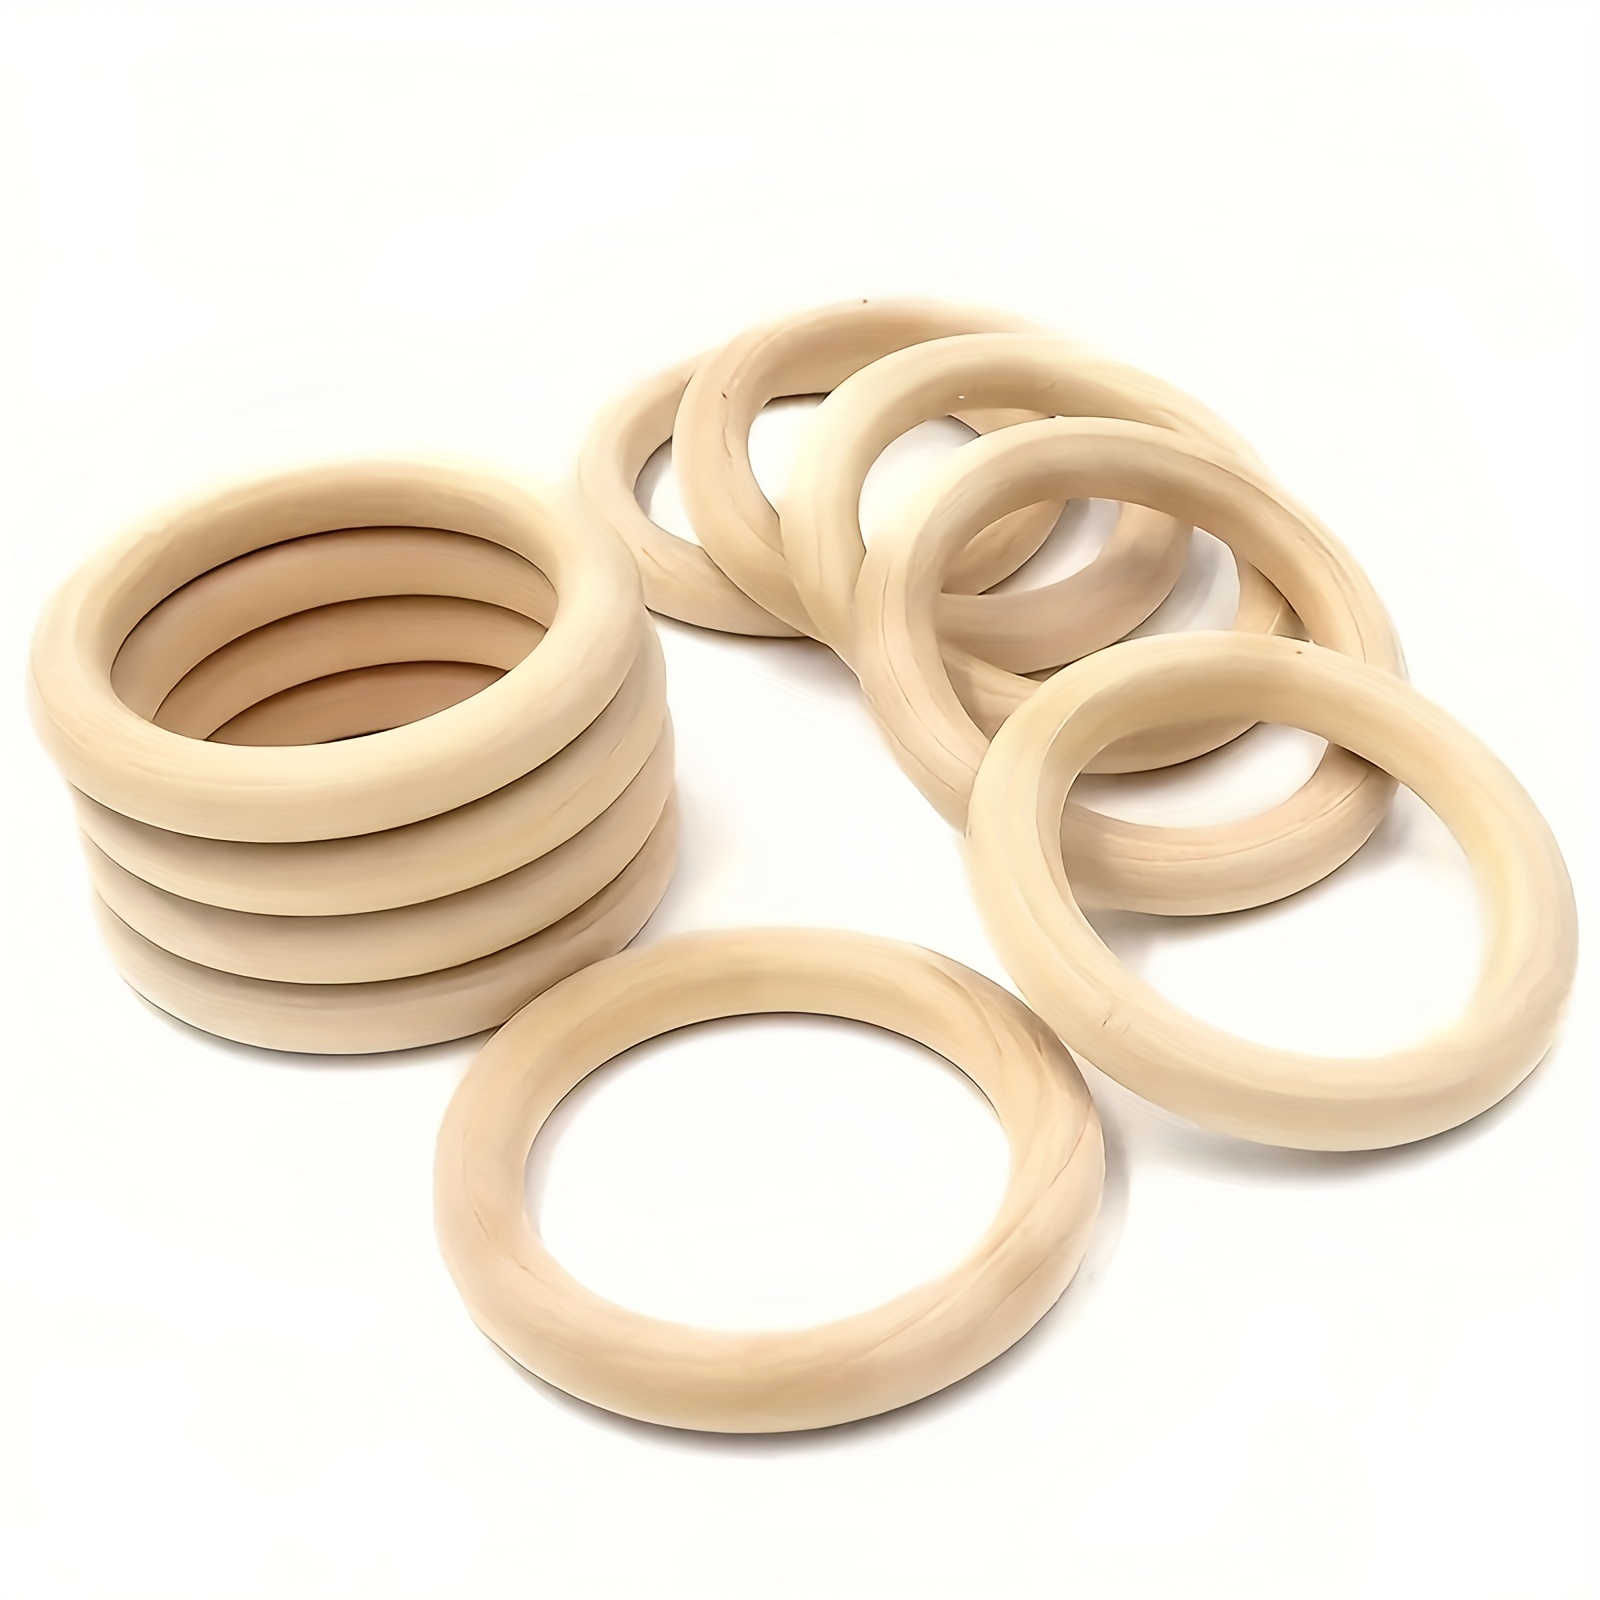 Wooden Rings Craft Mix Color Size Wood Loop Wooden Ring Circle for